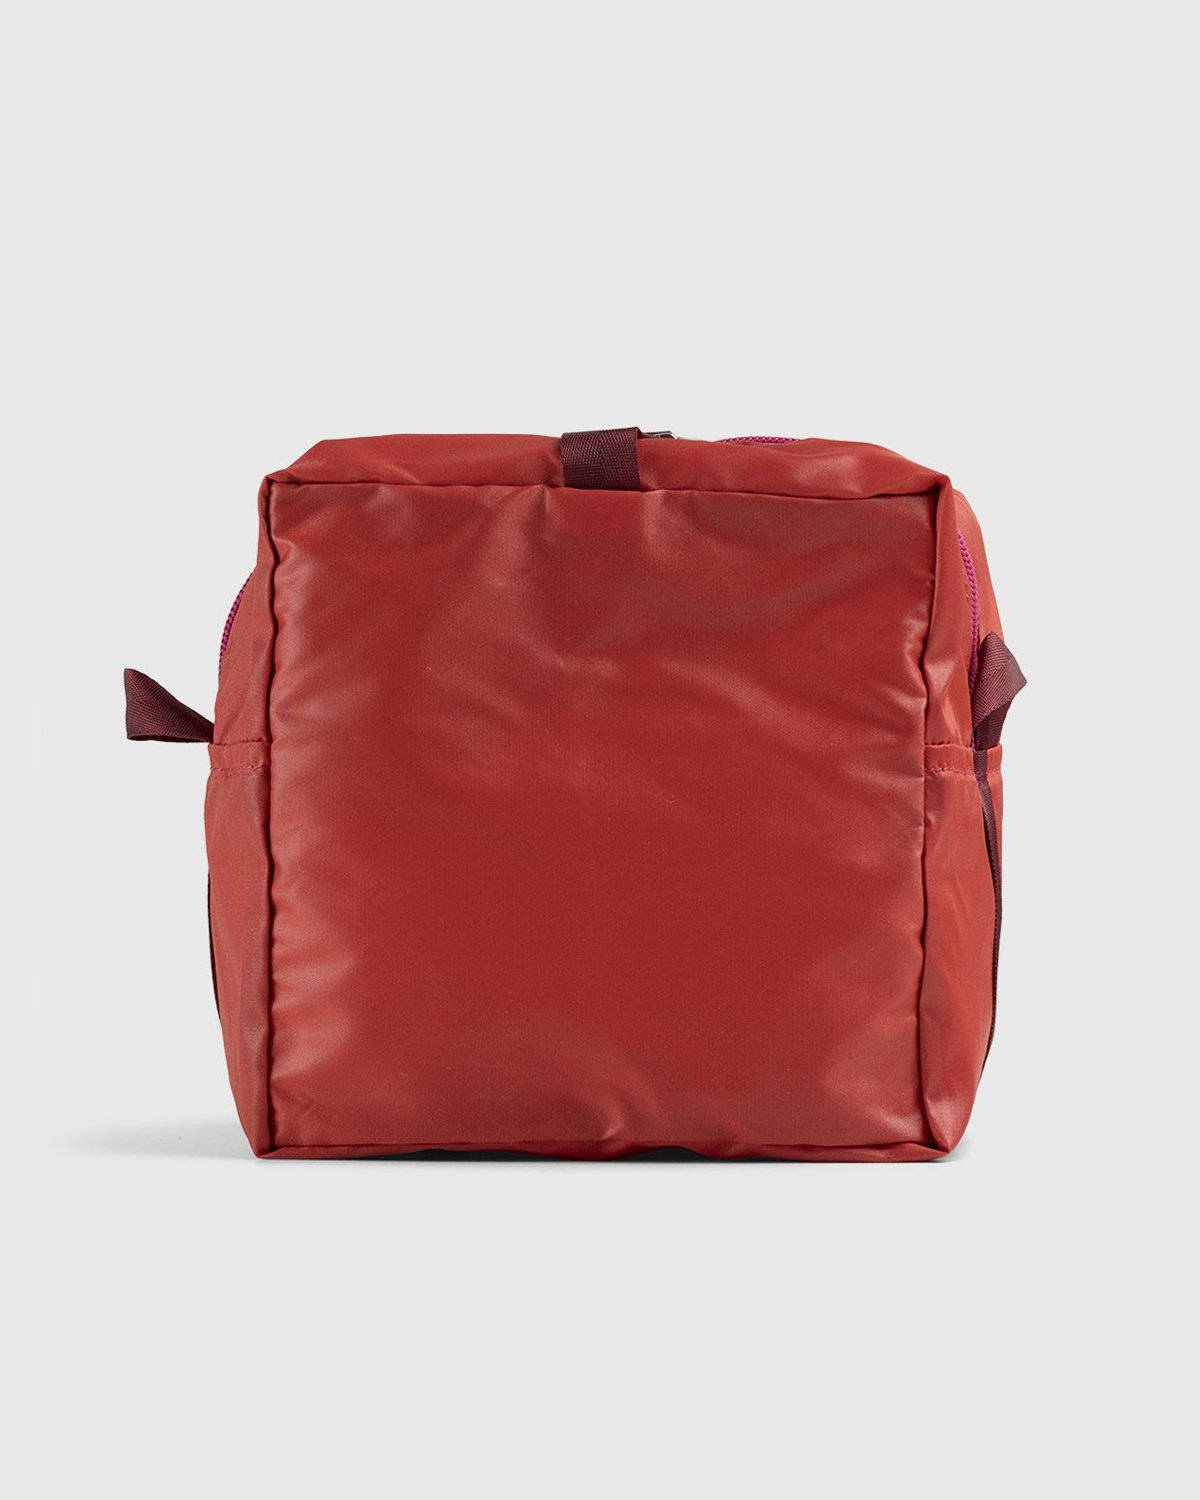 Porter-Yoshida & Co. - Snack Pack Pouch Scarlet - Accessories - Red - Image 2